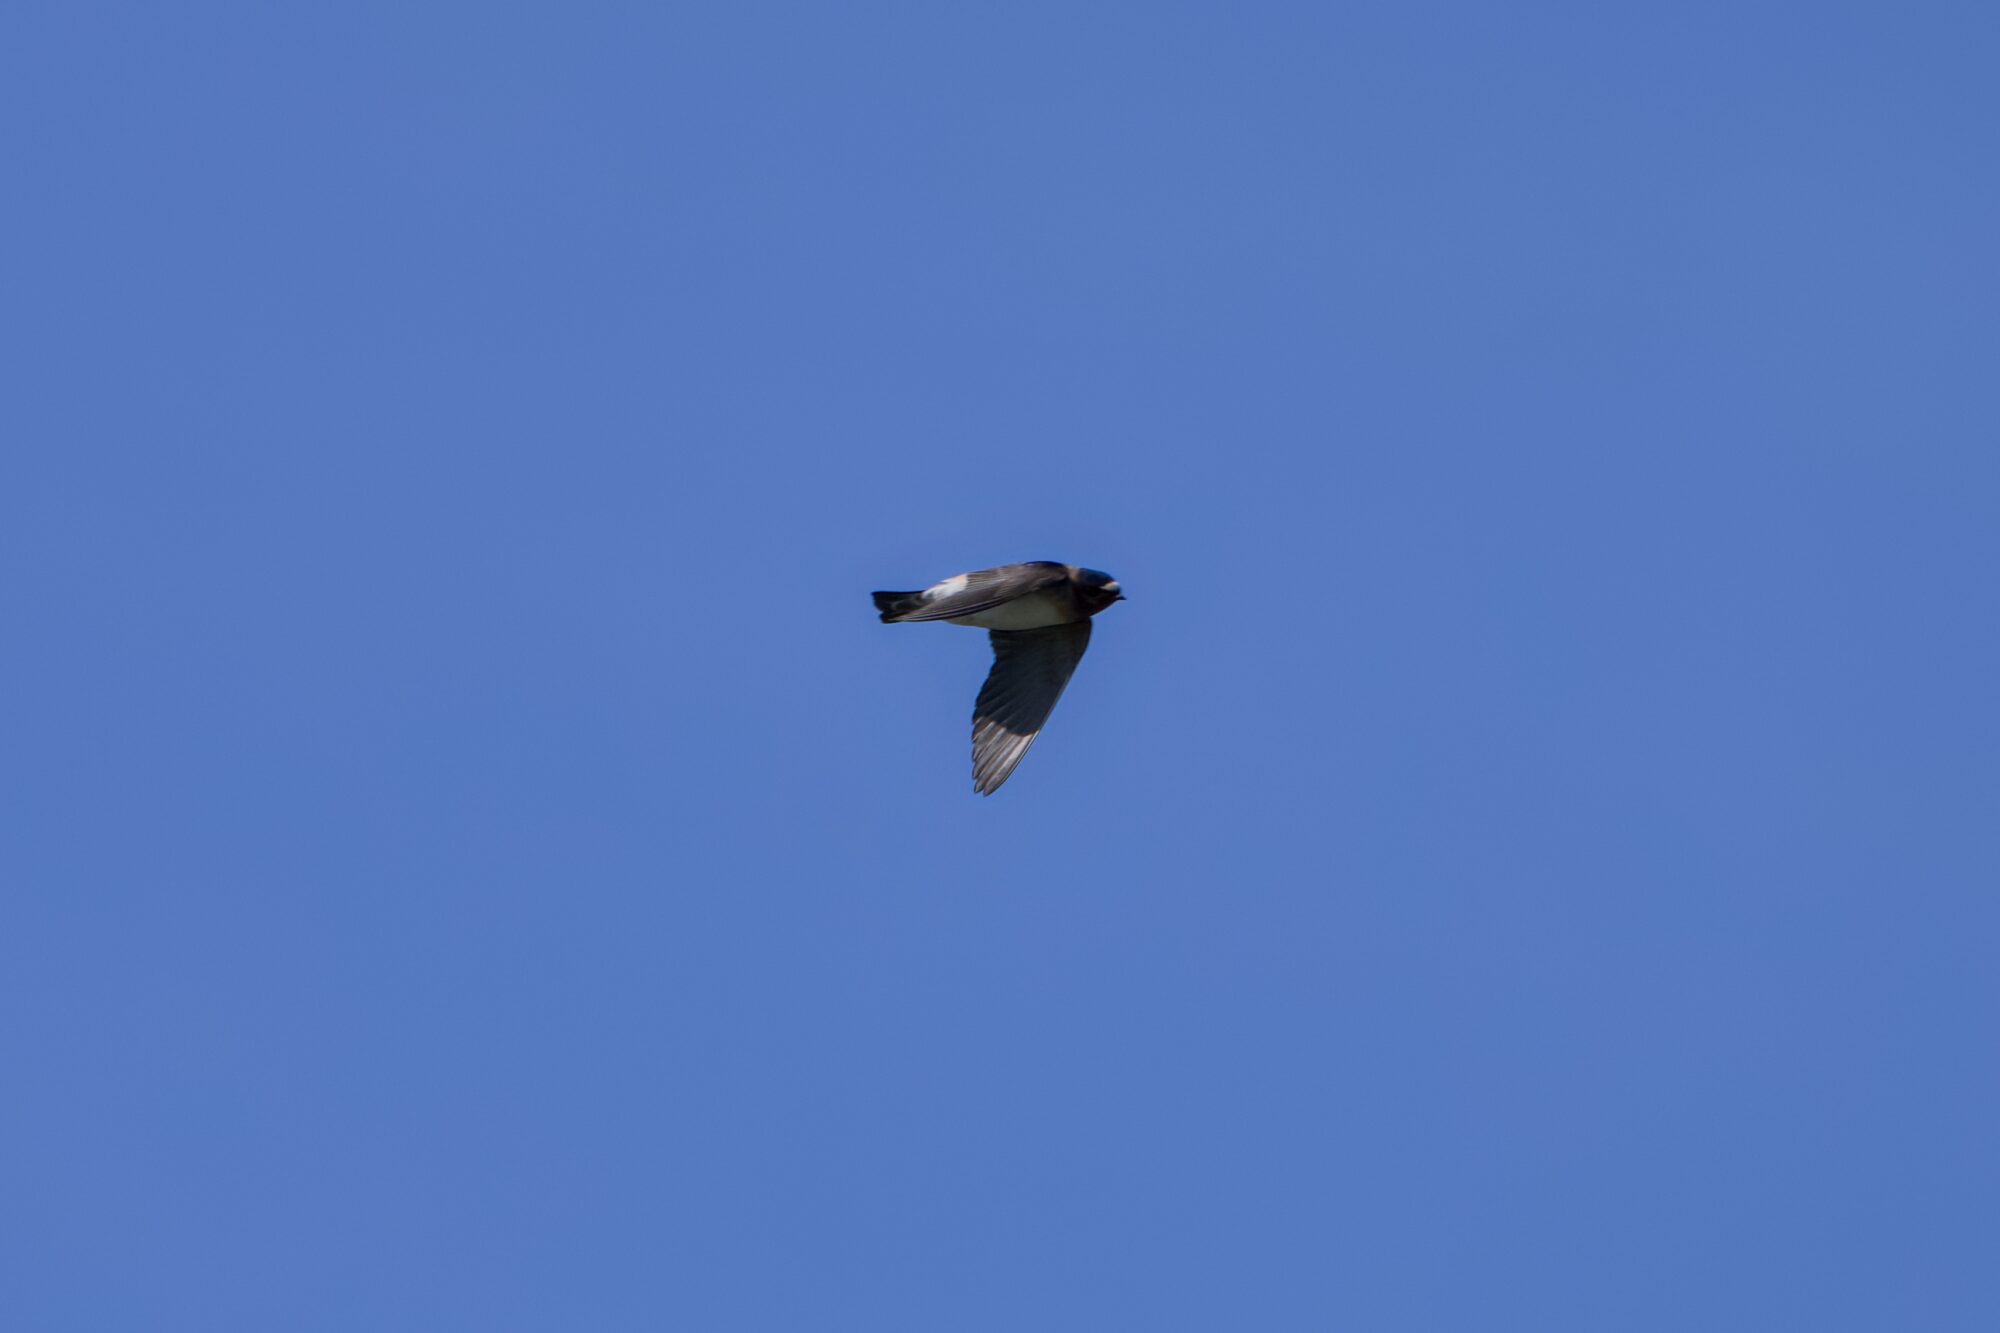 A somewhat blurry photo of a Cliff Swallow against a solid blue sky: it has a white rump and chest, brown body, and black head